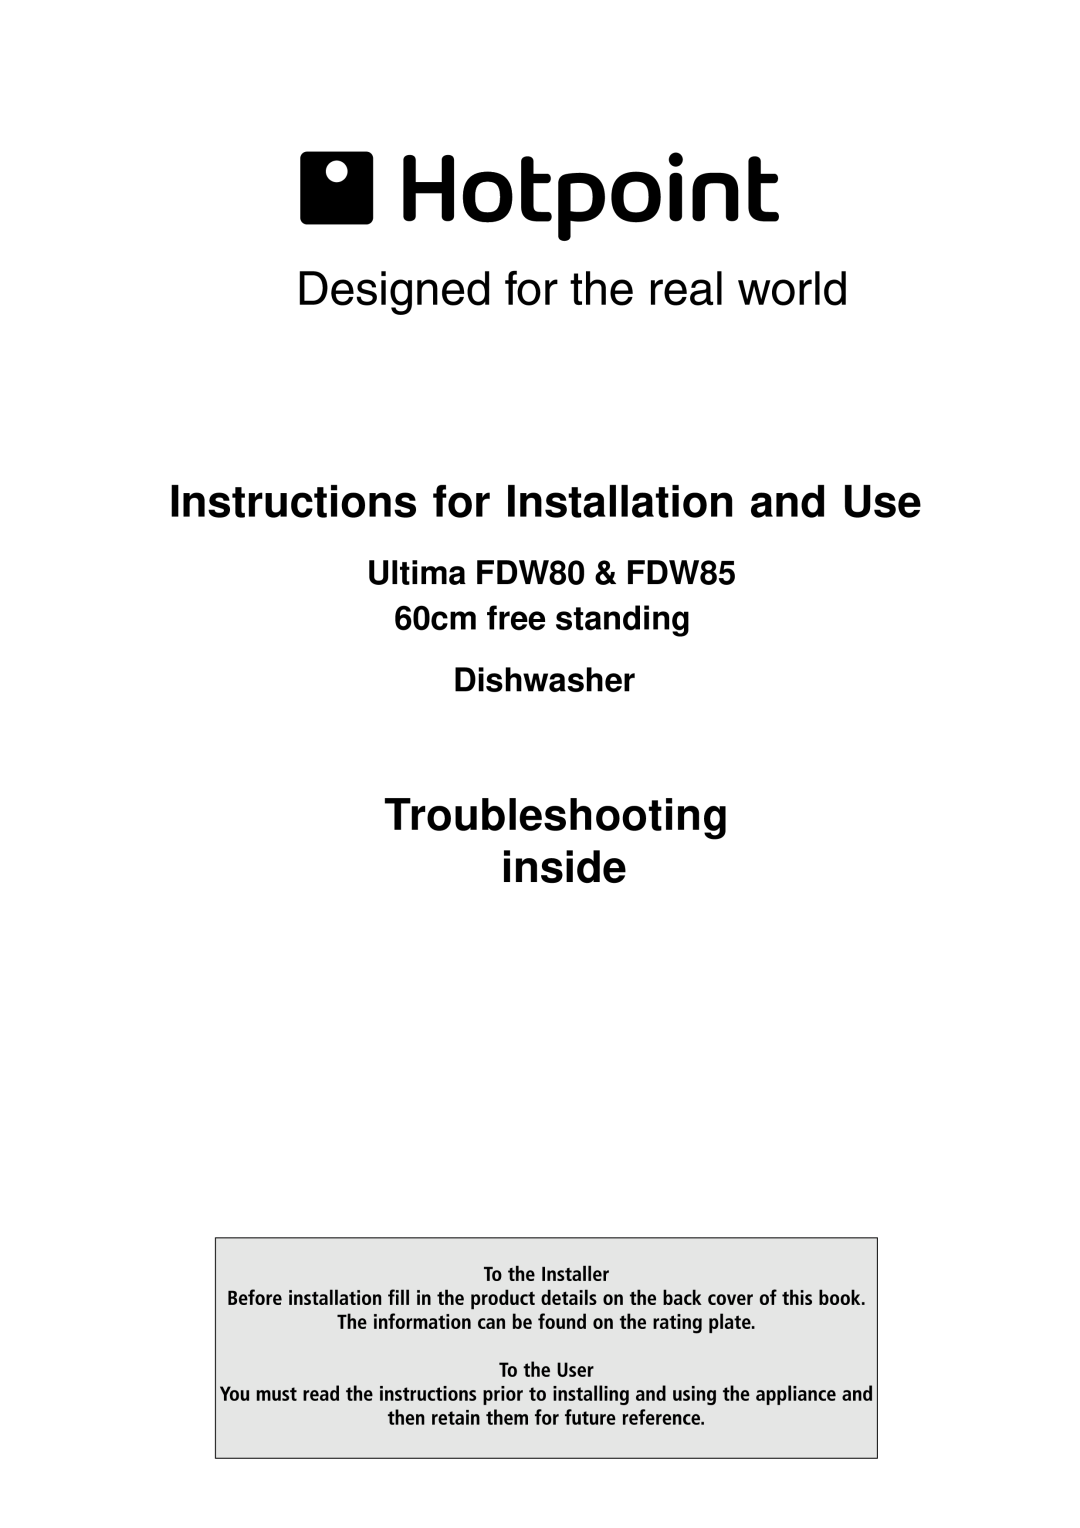 Hotpoint FDW85 manual Instructions for Installation and Use, Troubleshooting inside, Dishwasher 